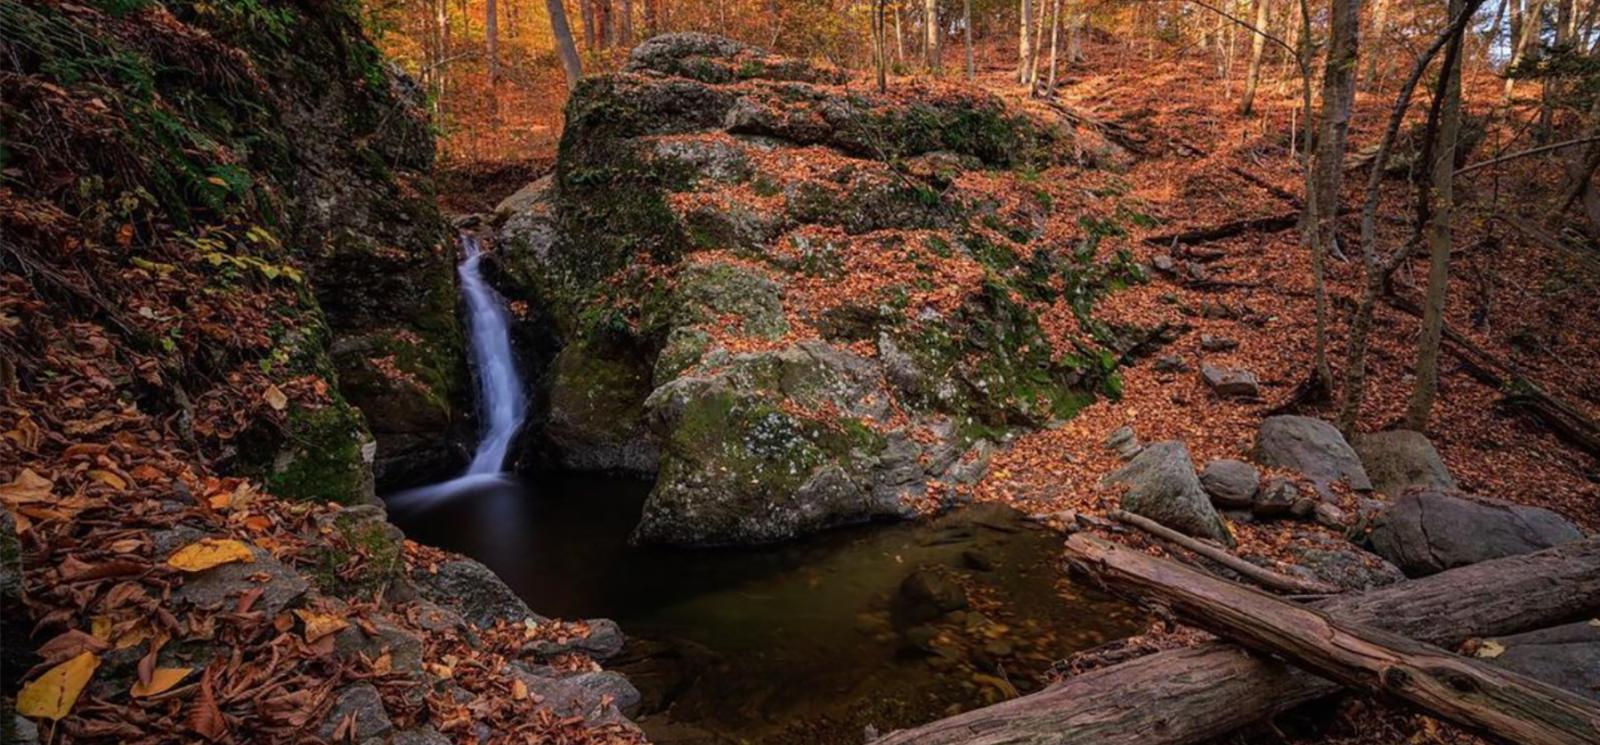 A small waterfall on the rocks in the woods in fall